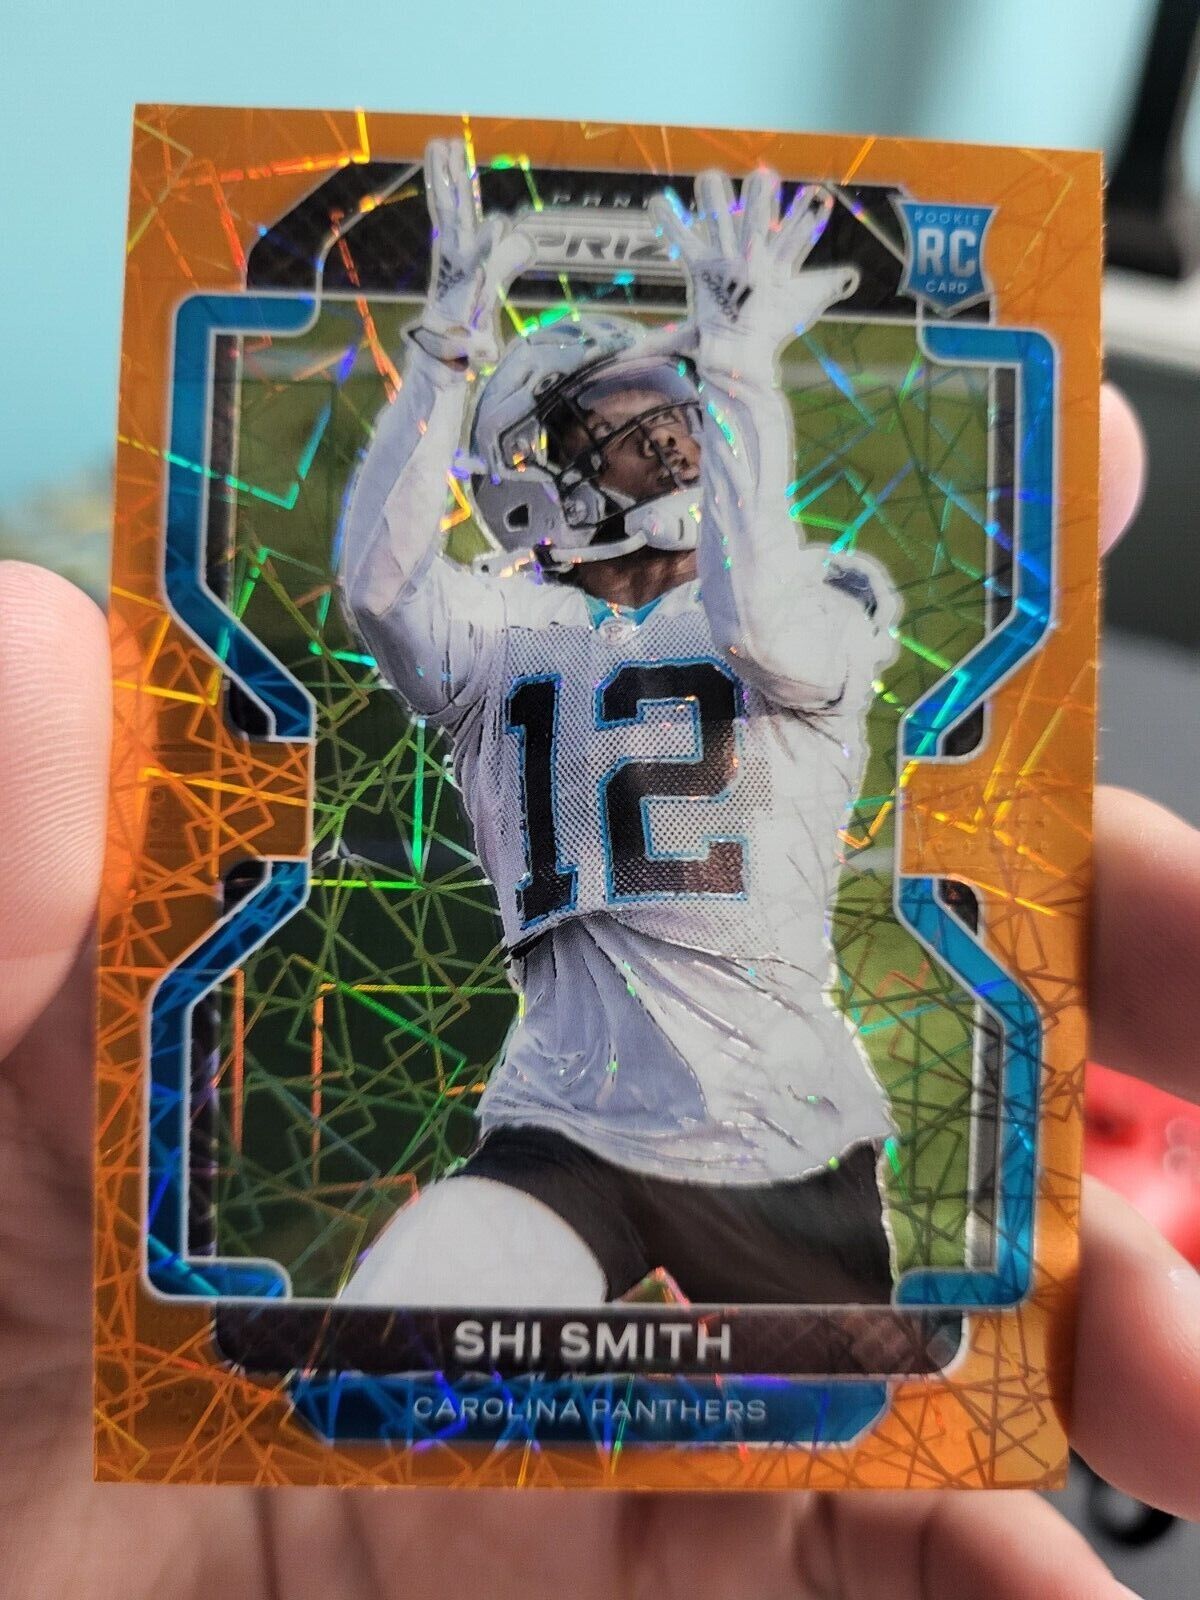 2021 PANINI PRIZM SHI SMITH Orange Lazer #408 Panthers Rookie RC MINT NFL Card. rookie card picture